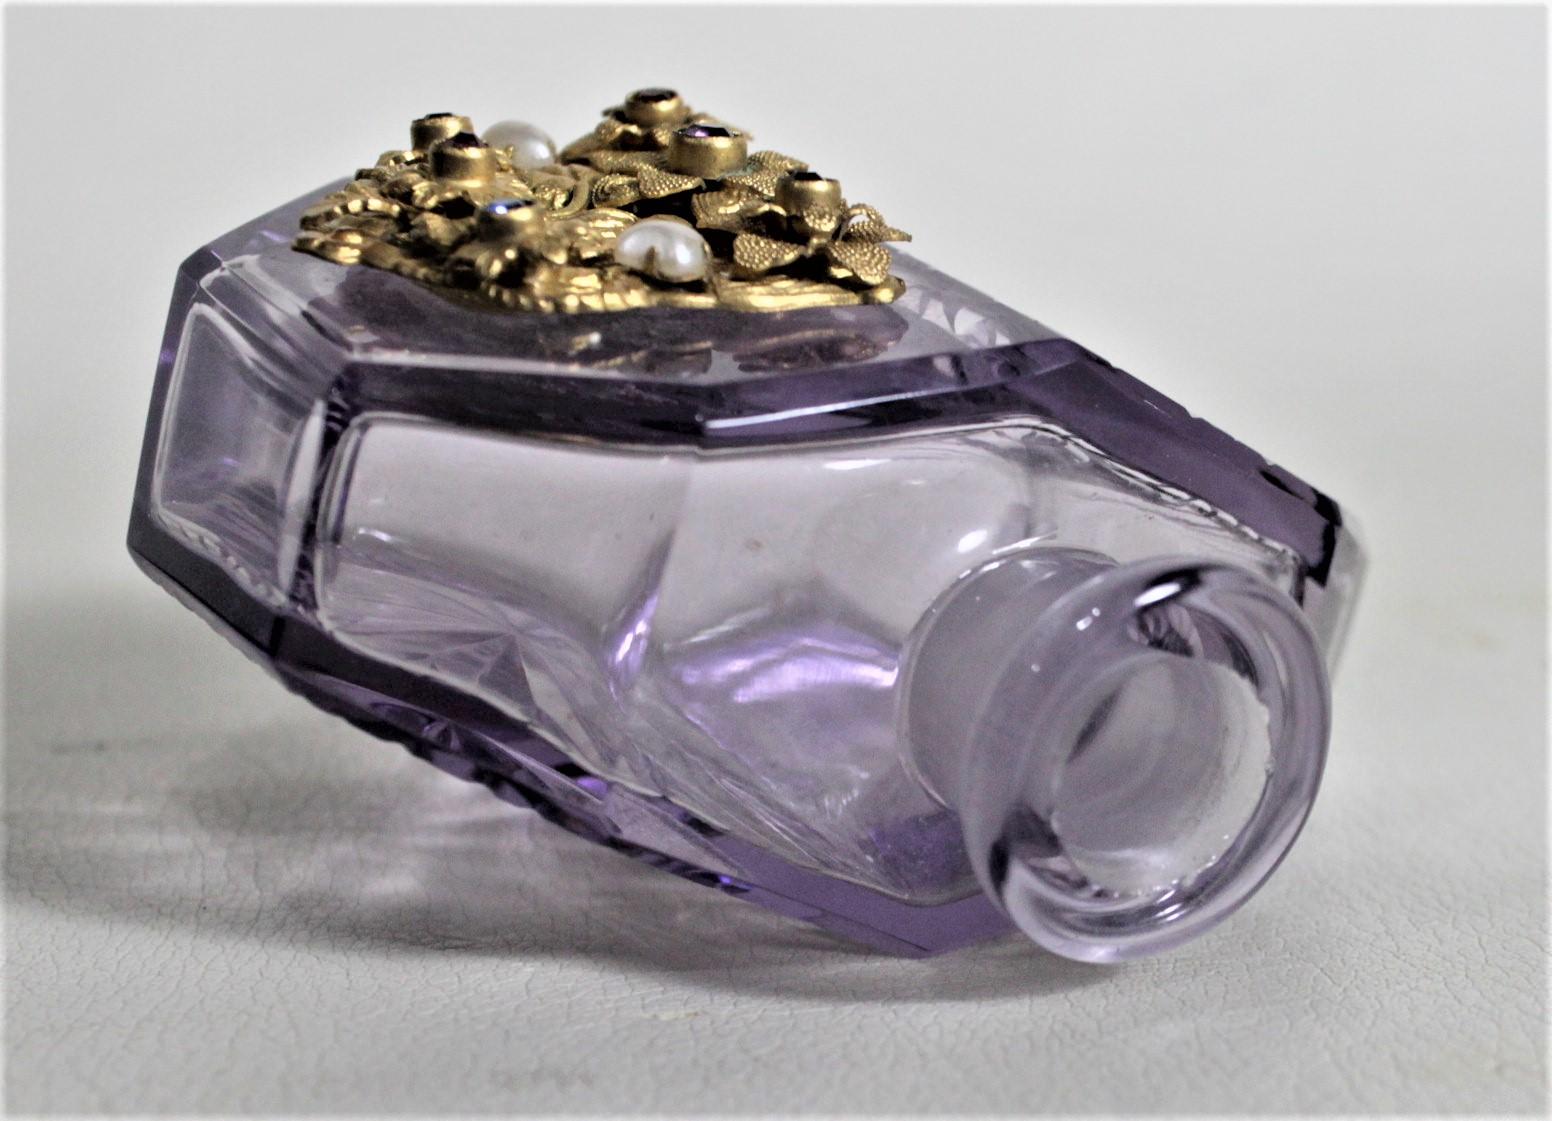 20th Century Art Deco Czech Cut Crystal Perfume Bottle with Applied Filigree and Inlaid Glass